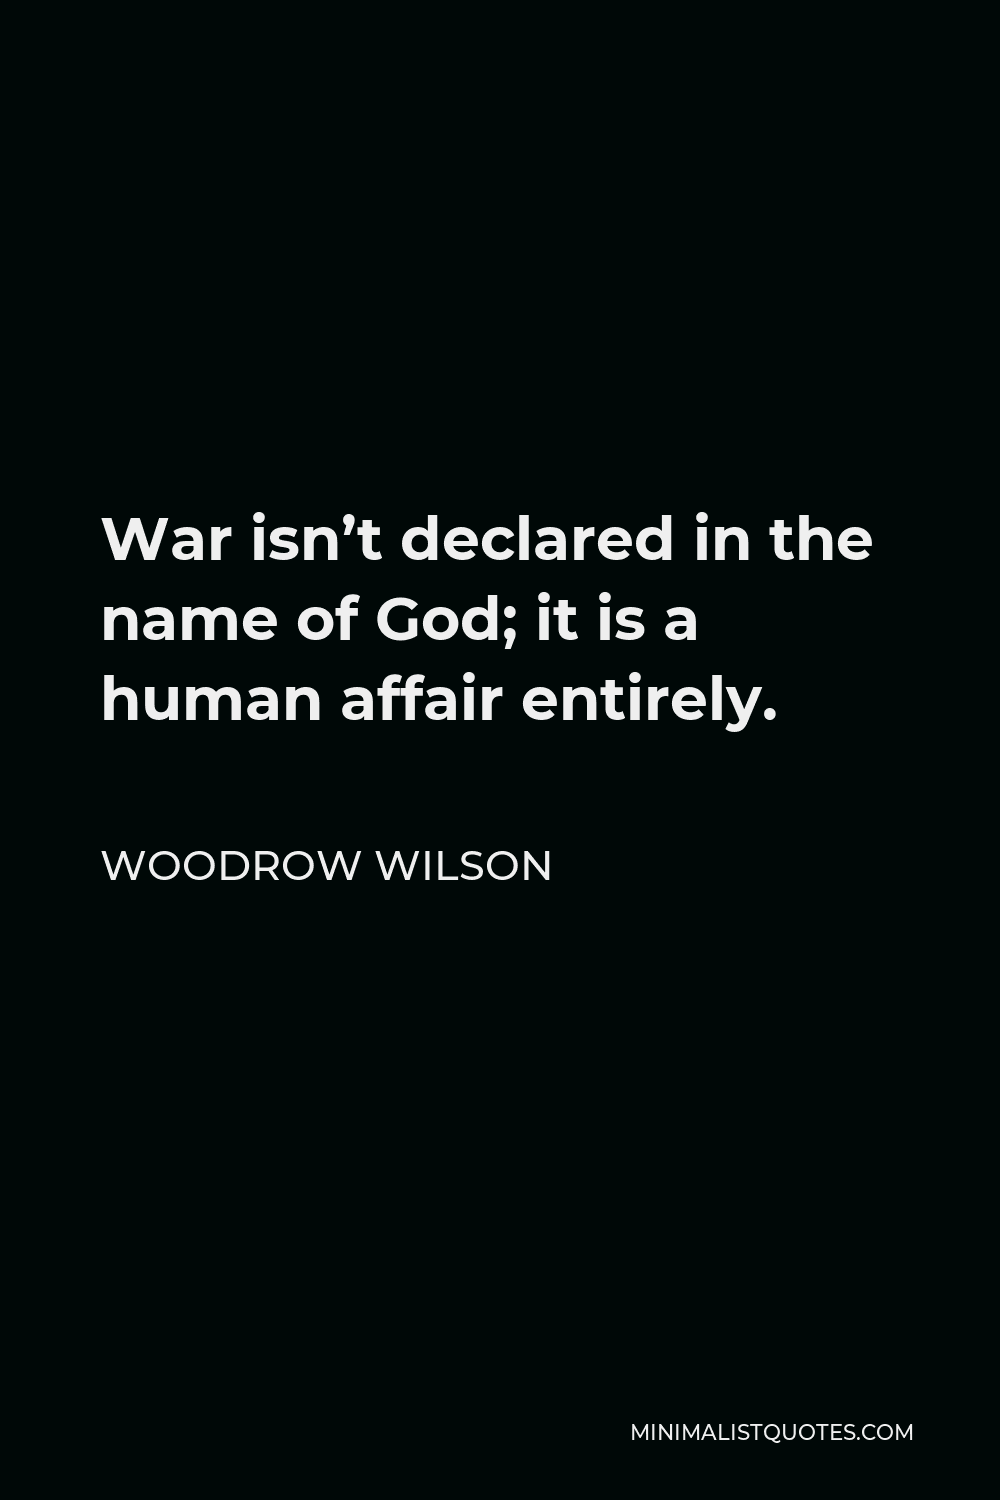 Woodrow Wilson Quote - War isn’t declared in the name of God; it is a human affair entirely.